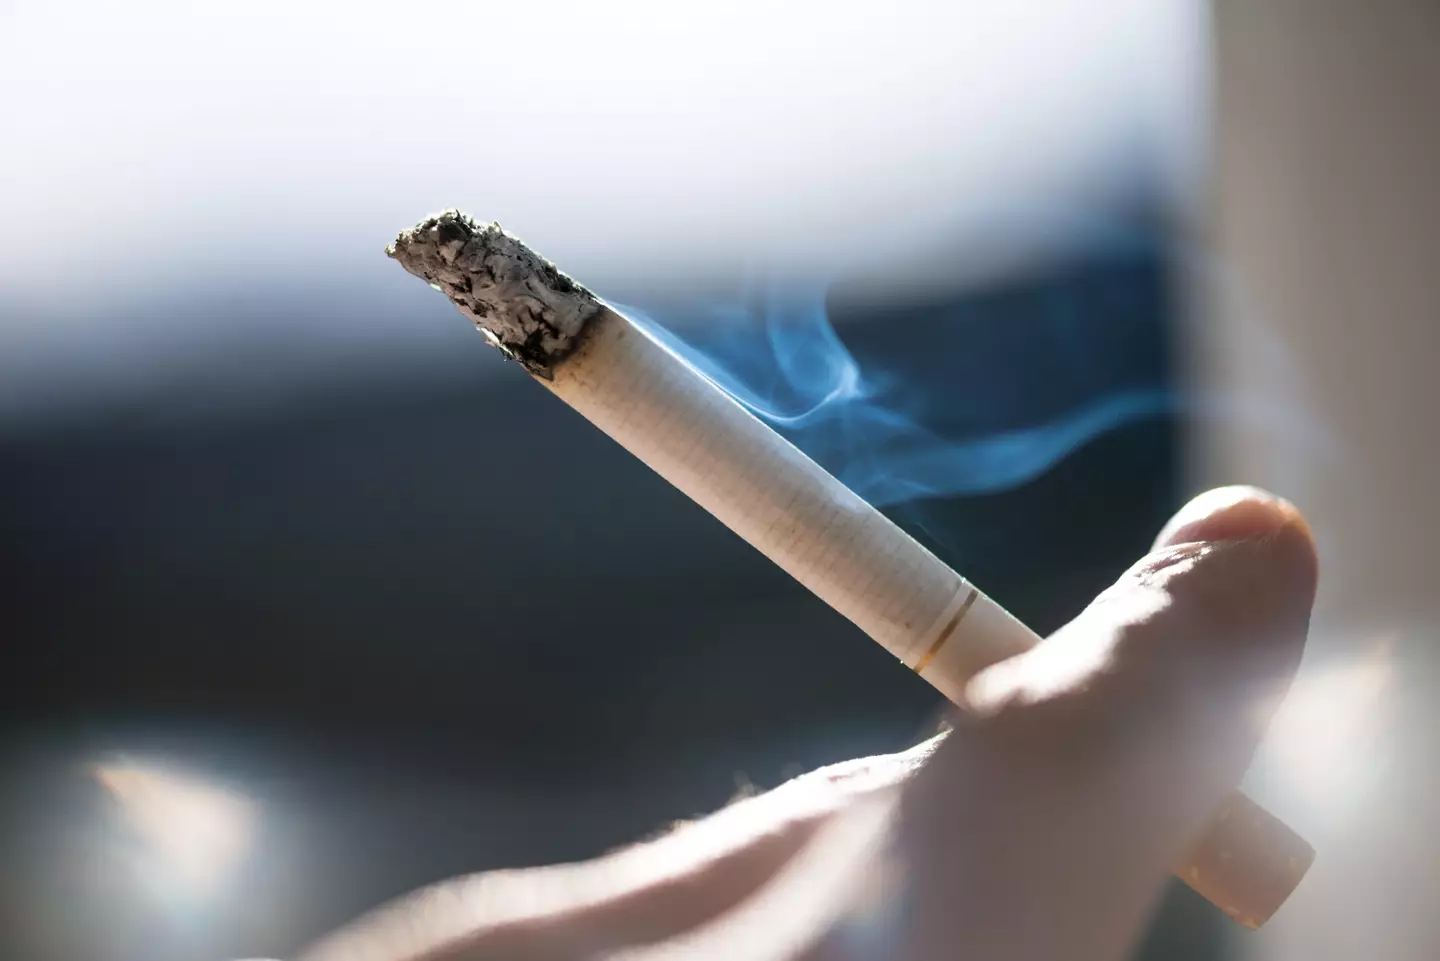 Researchers said smoking was the leading cancer risk factor.